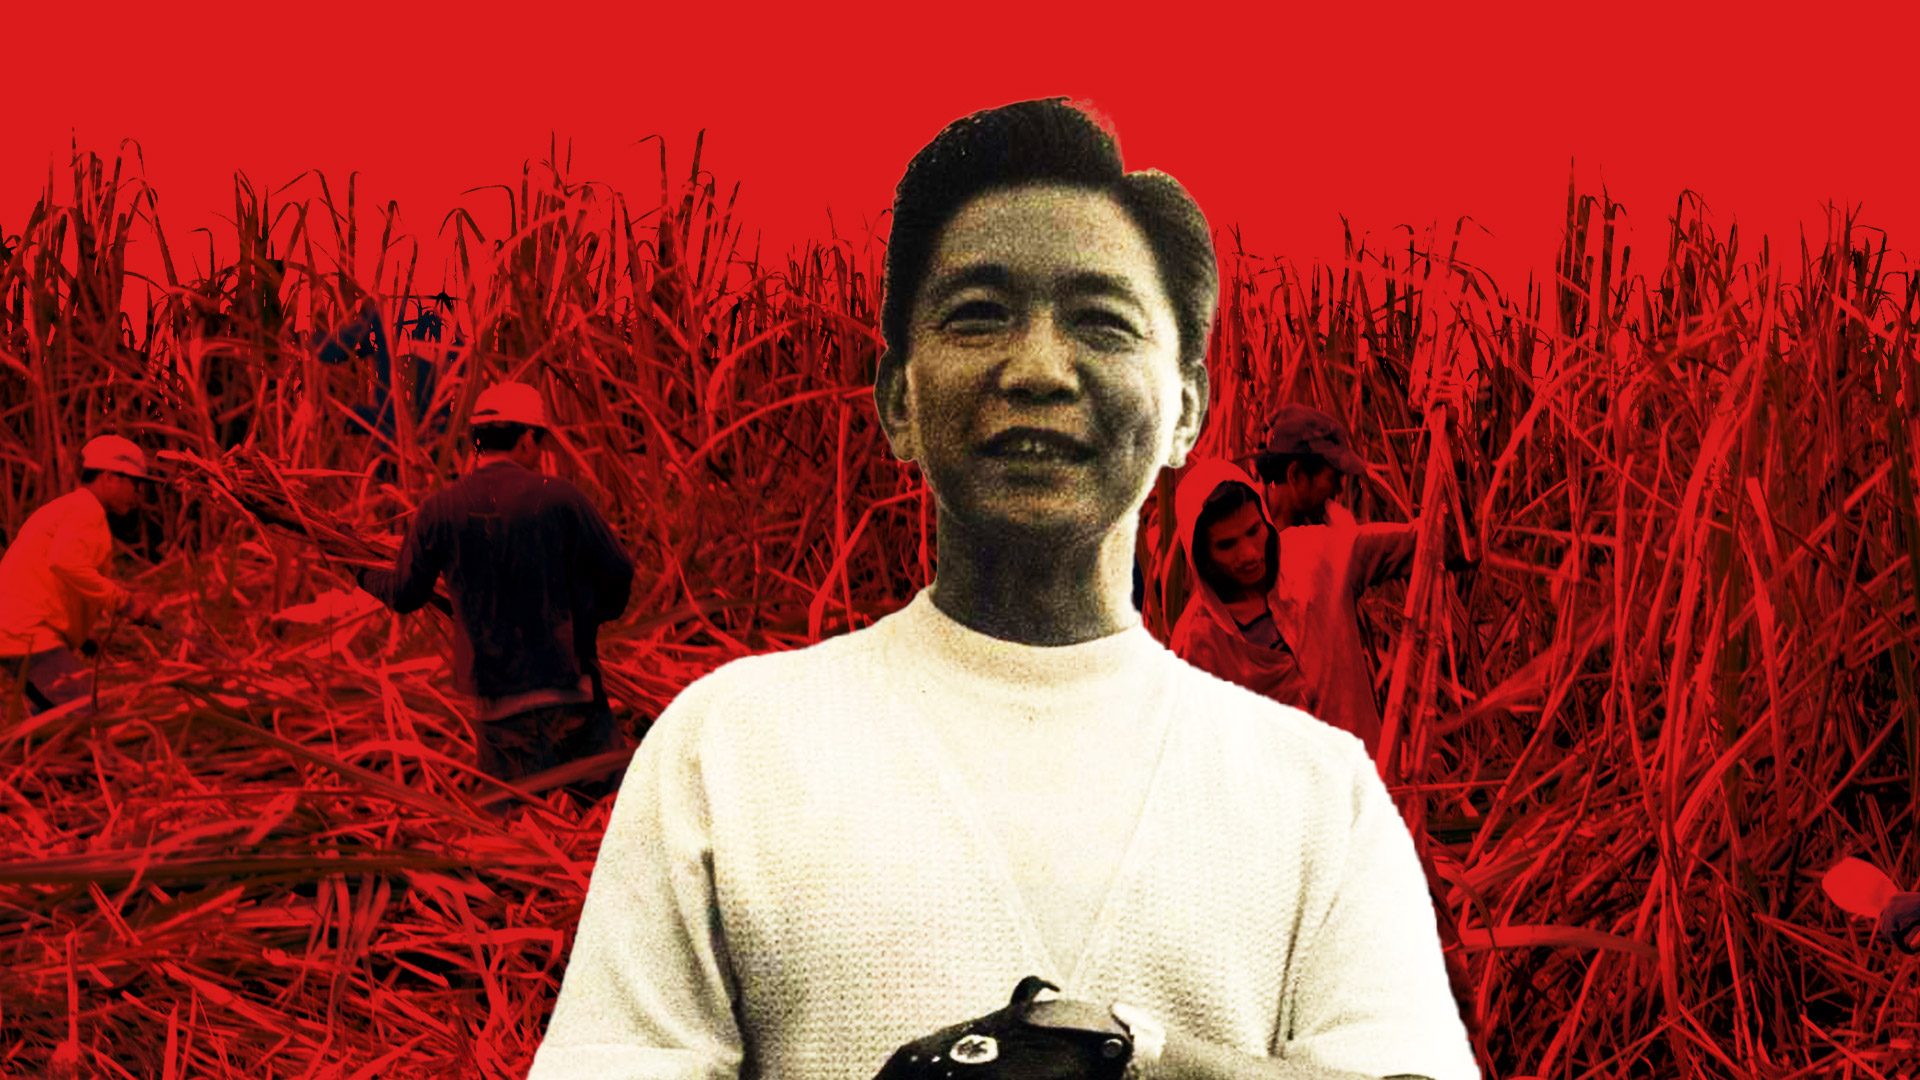 EXPLAINER: What happened during the sugar crisis under the Marcos dictatorship?